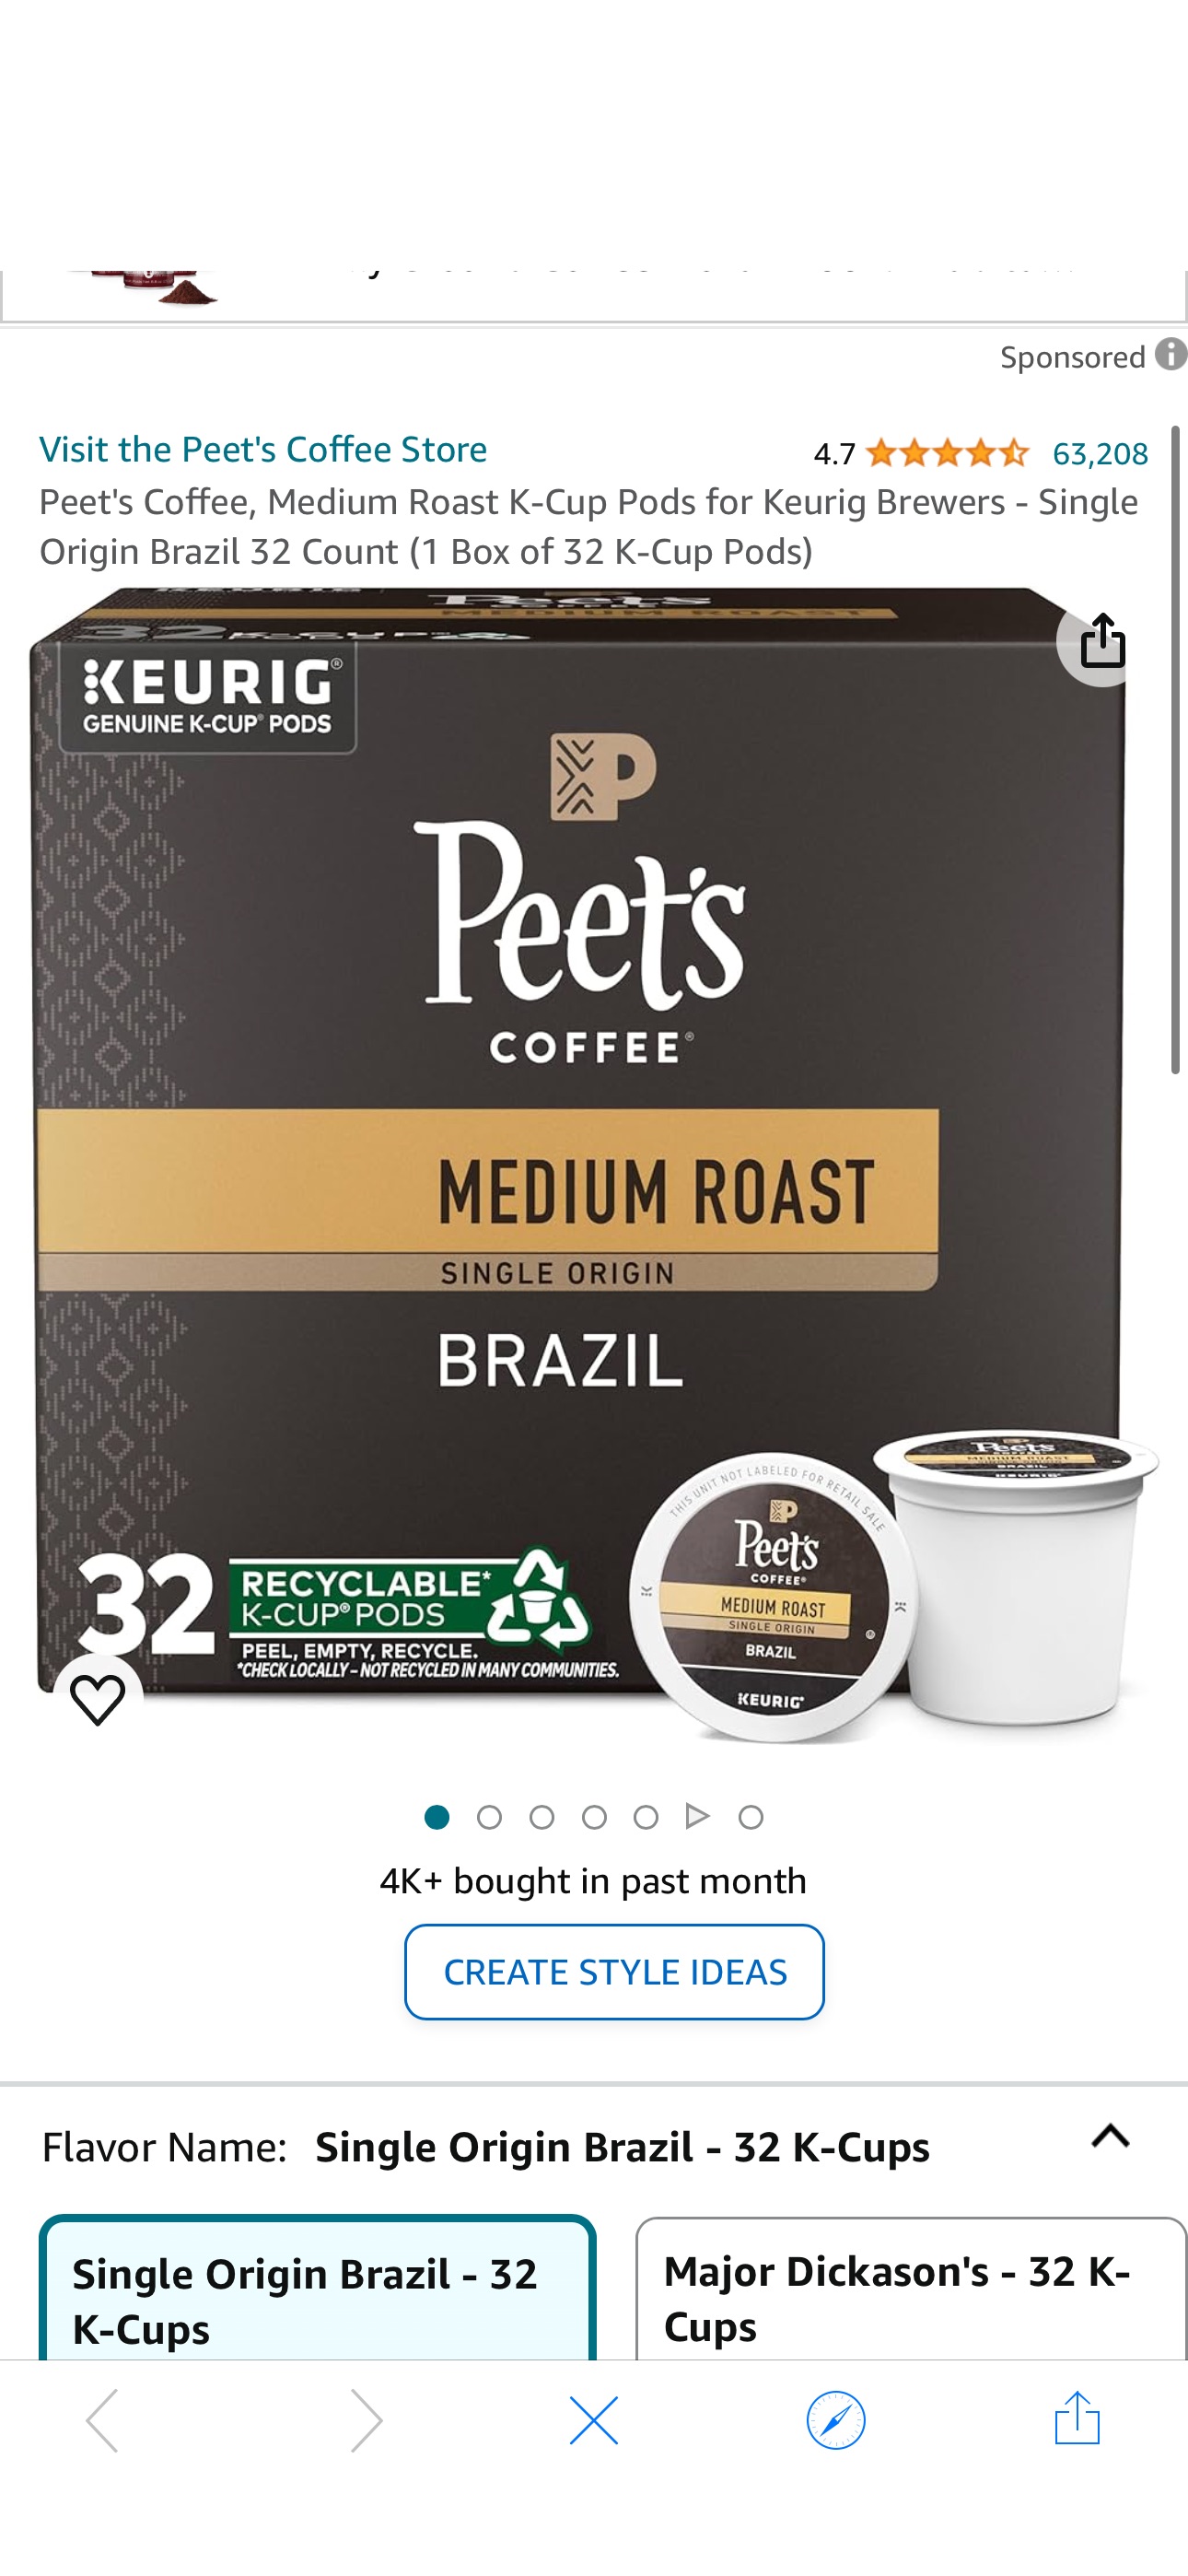 Amazon.com : Peet's Coffee, Medium Roast K-Cup Pods for Keurig Brewers - Single Origin Brazil 32 Count (1 Box of 32 K-Cup Pods) : Everything Else